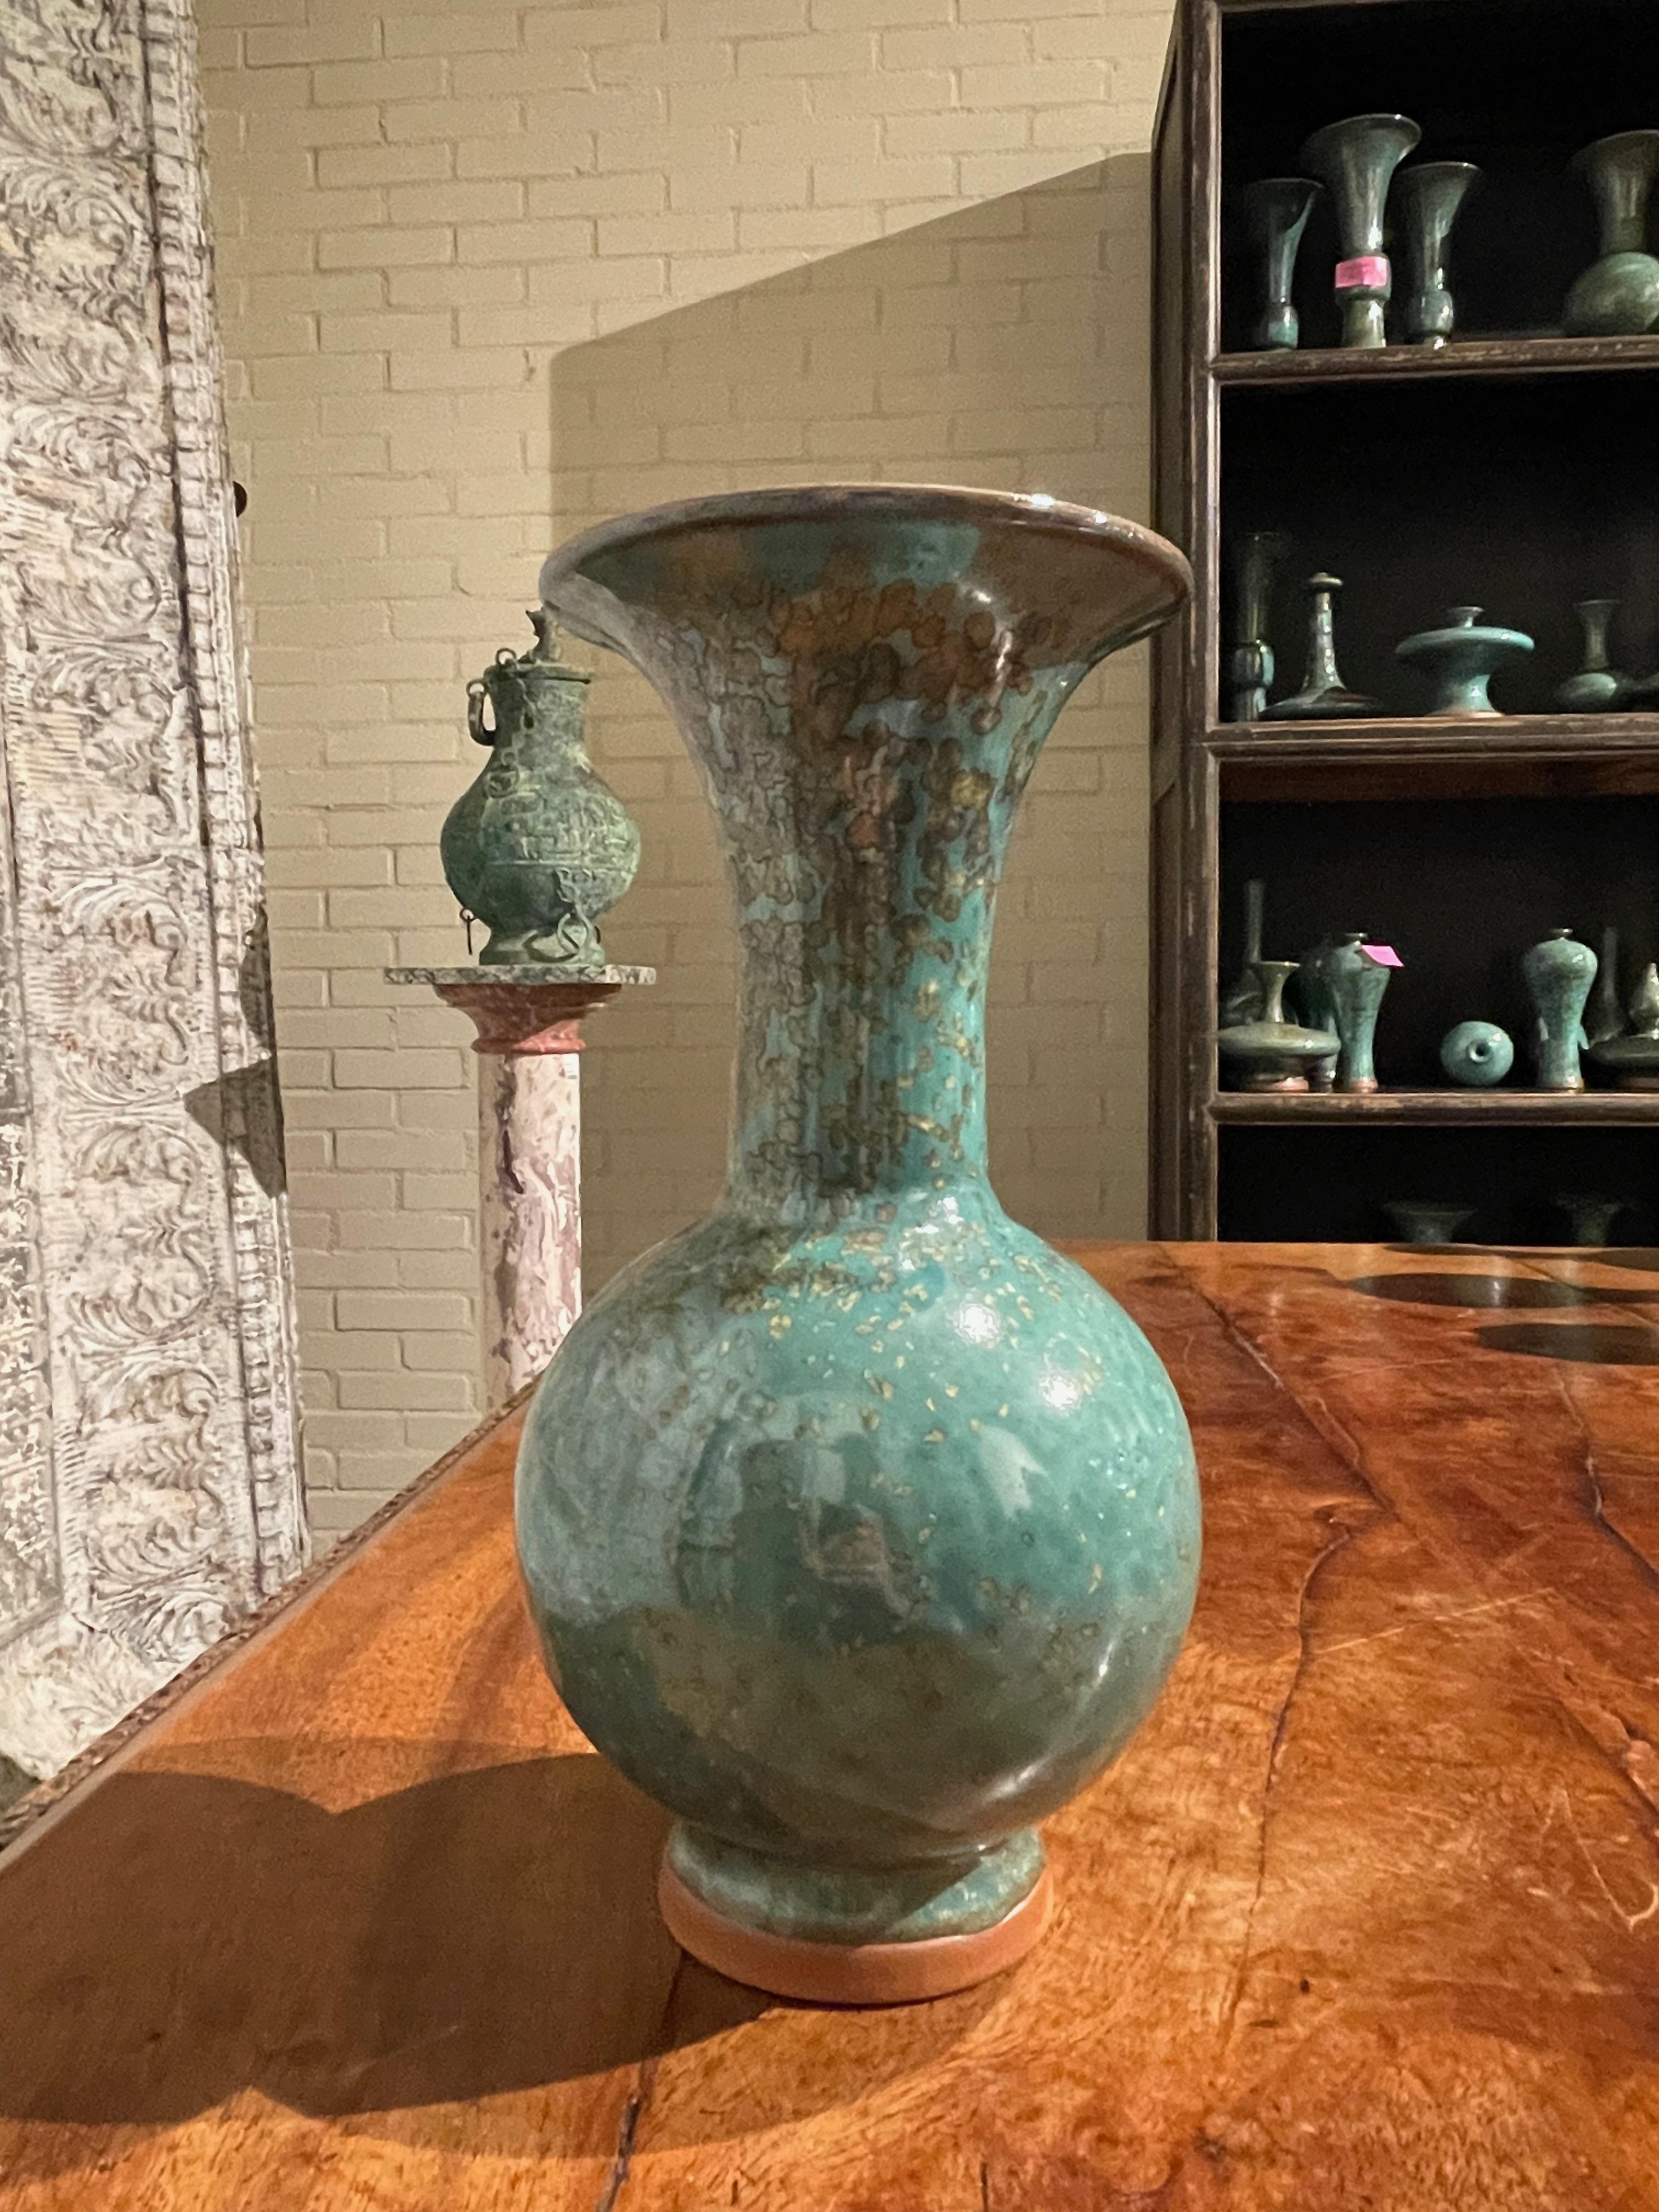 Contemporary Chinese turquoise with gold speckled glaze vase.
Classic shape with wide spout opening.
Two available and sold individually.
One of several pieces from a large collection.